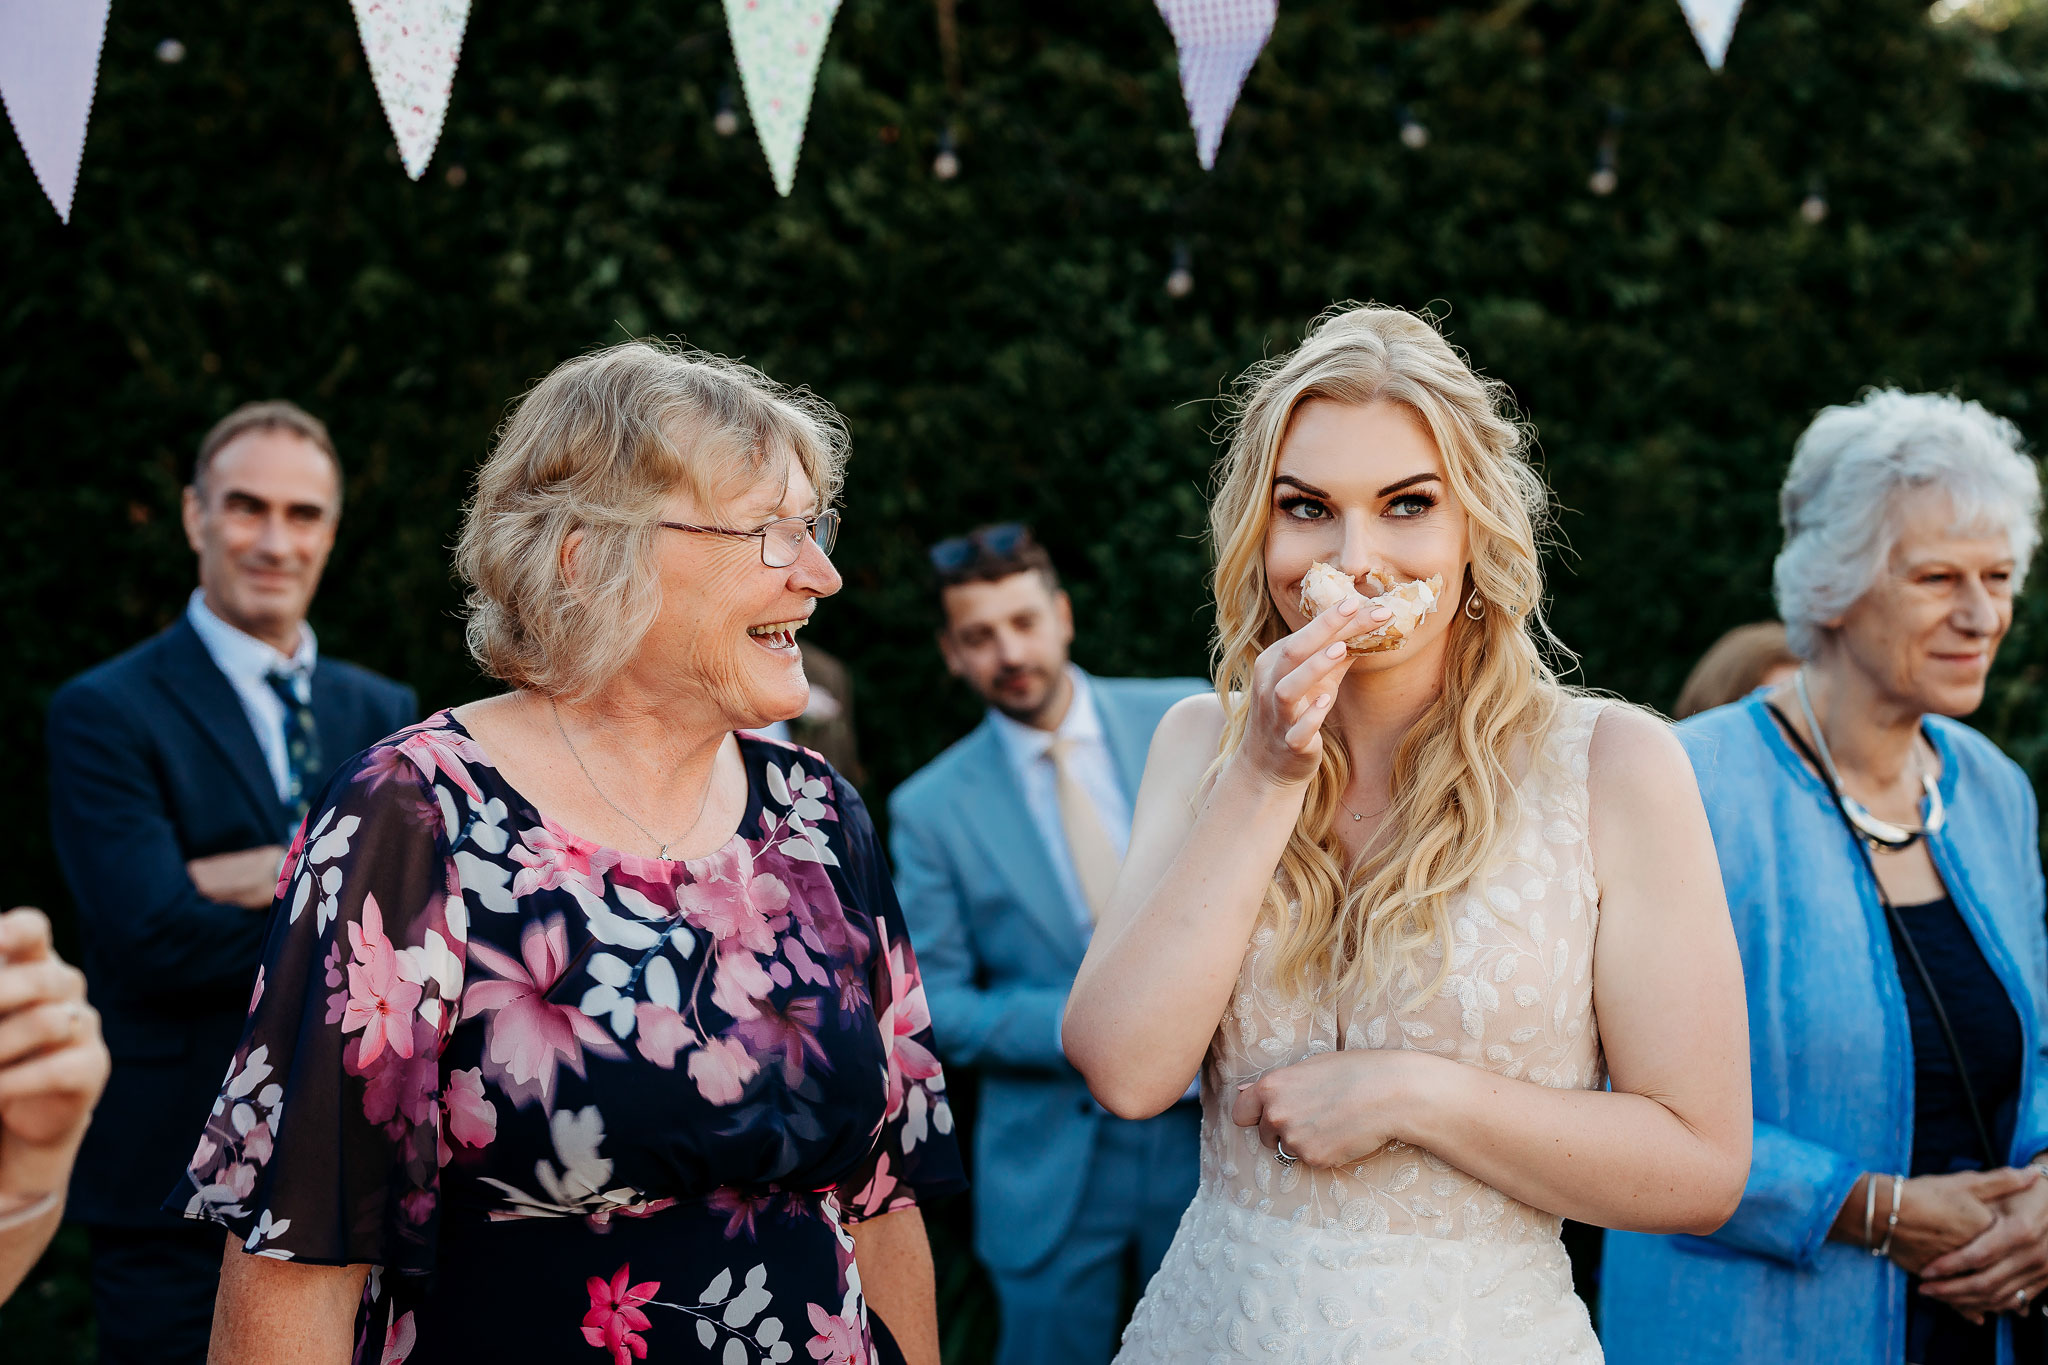 the bride smiling with her doughnut